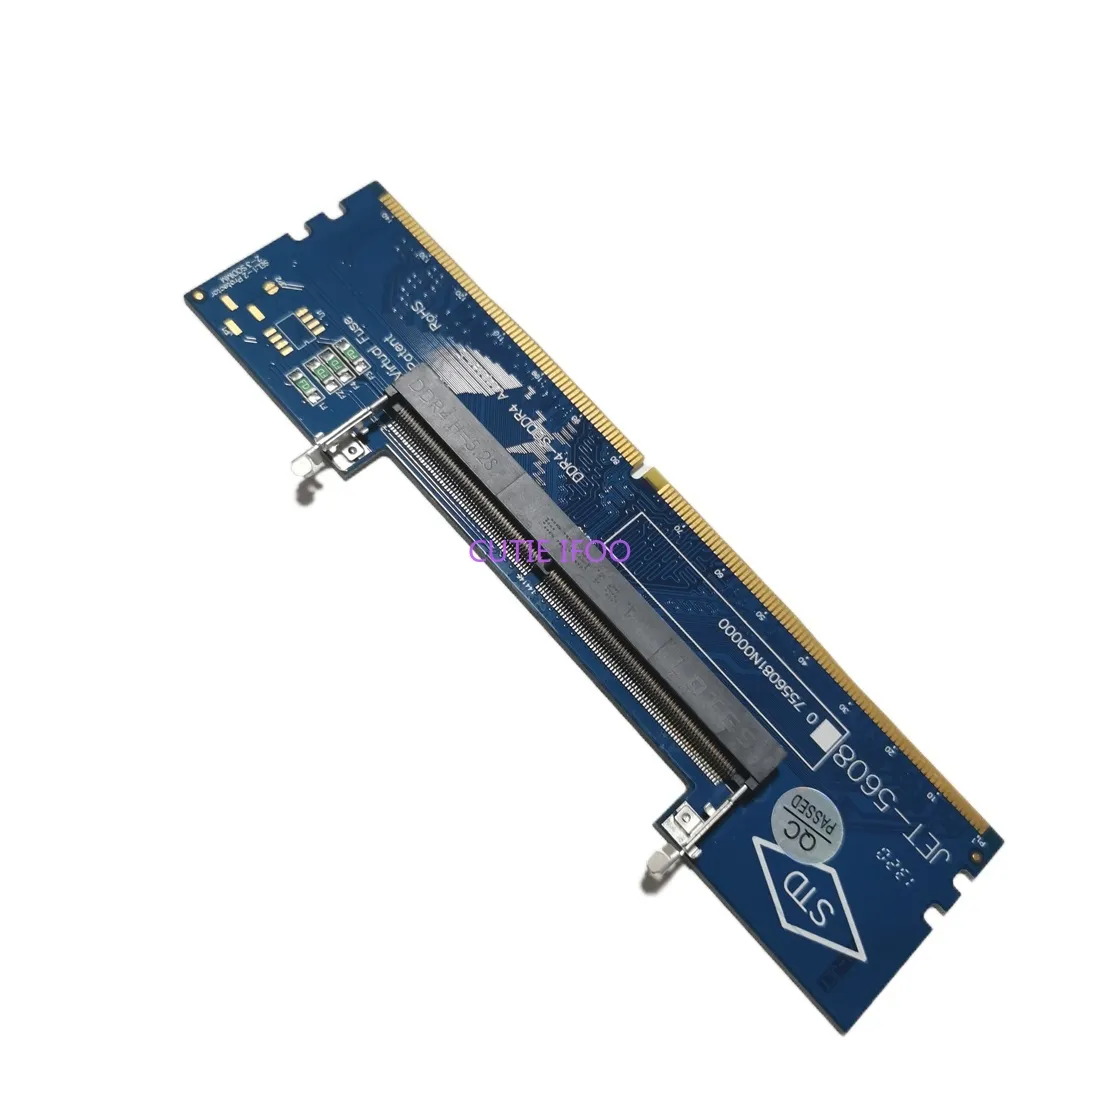 Notebook Laptop Computer Mainboard SO-DIMM DDR4 to Desktop PC Motherboard DIMM Memory RAM DDR4 Converter Card Adapter